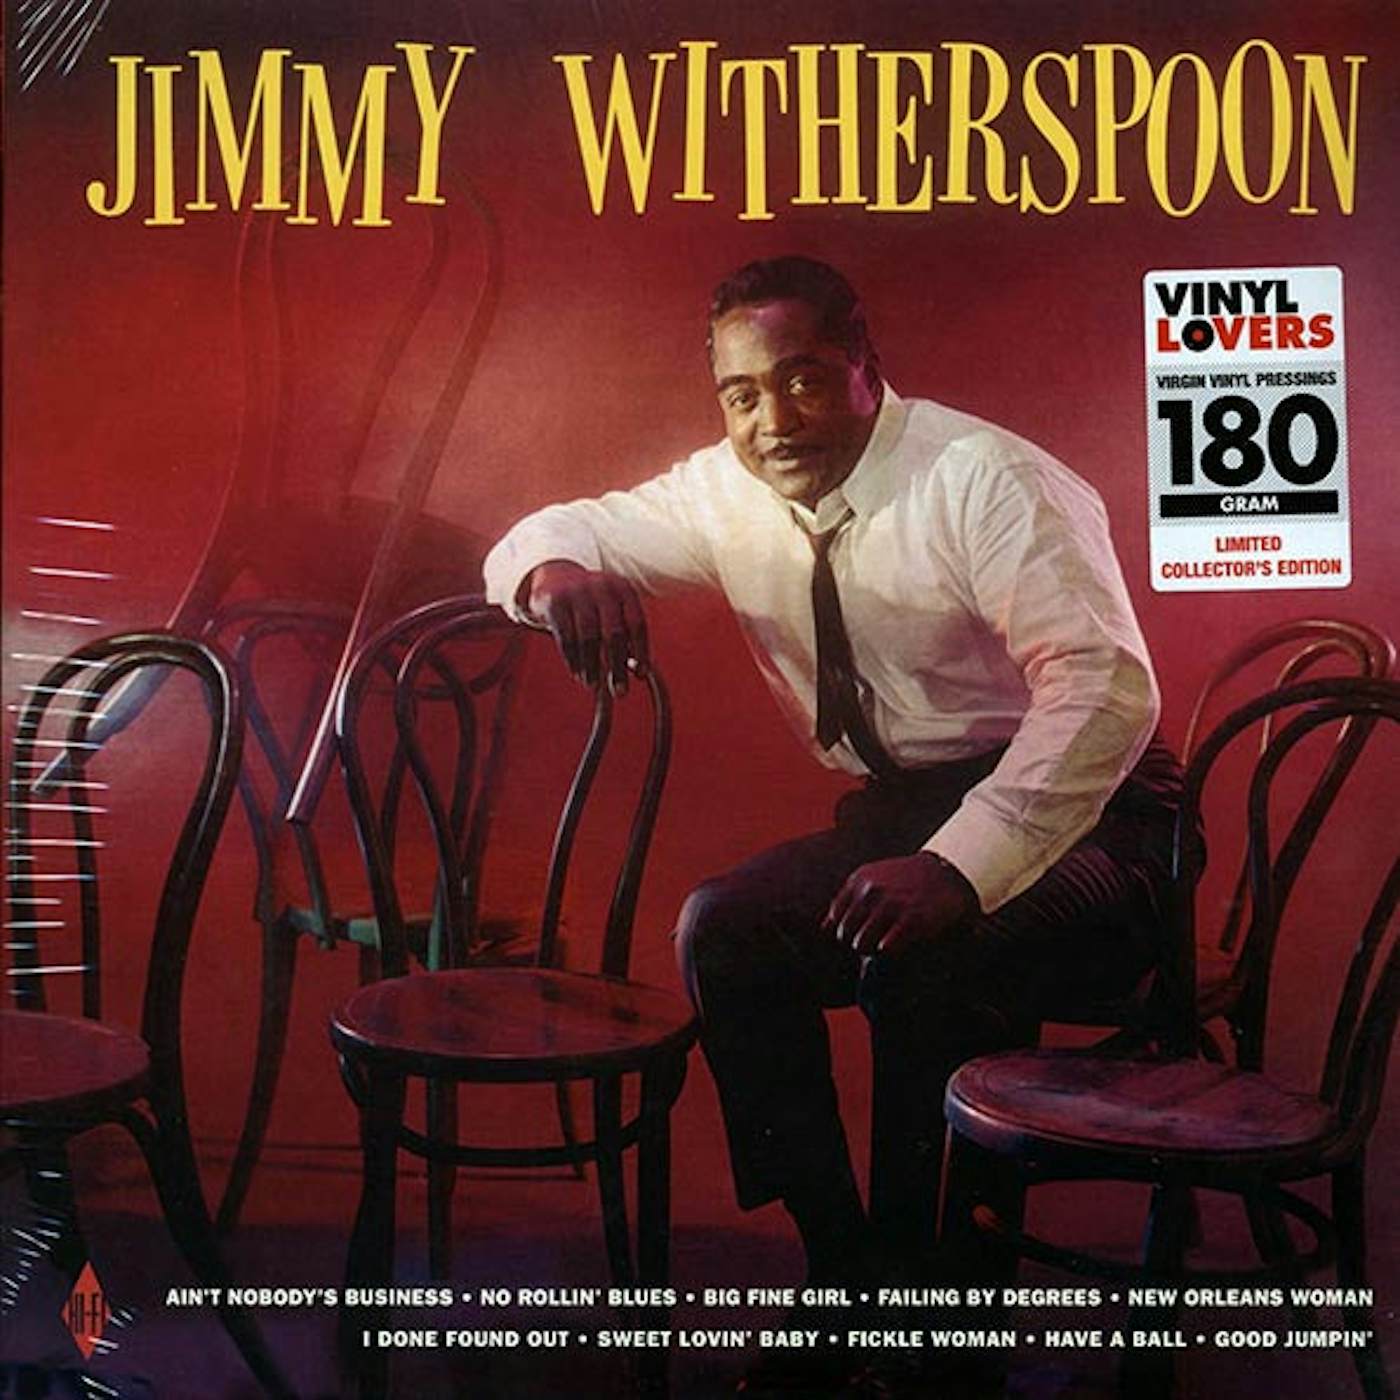 Jimmy Witherspoon  LP -  Jimmy Witherspoon (ltd. ed.) (180g) (HighDef VV) (Vinyl)